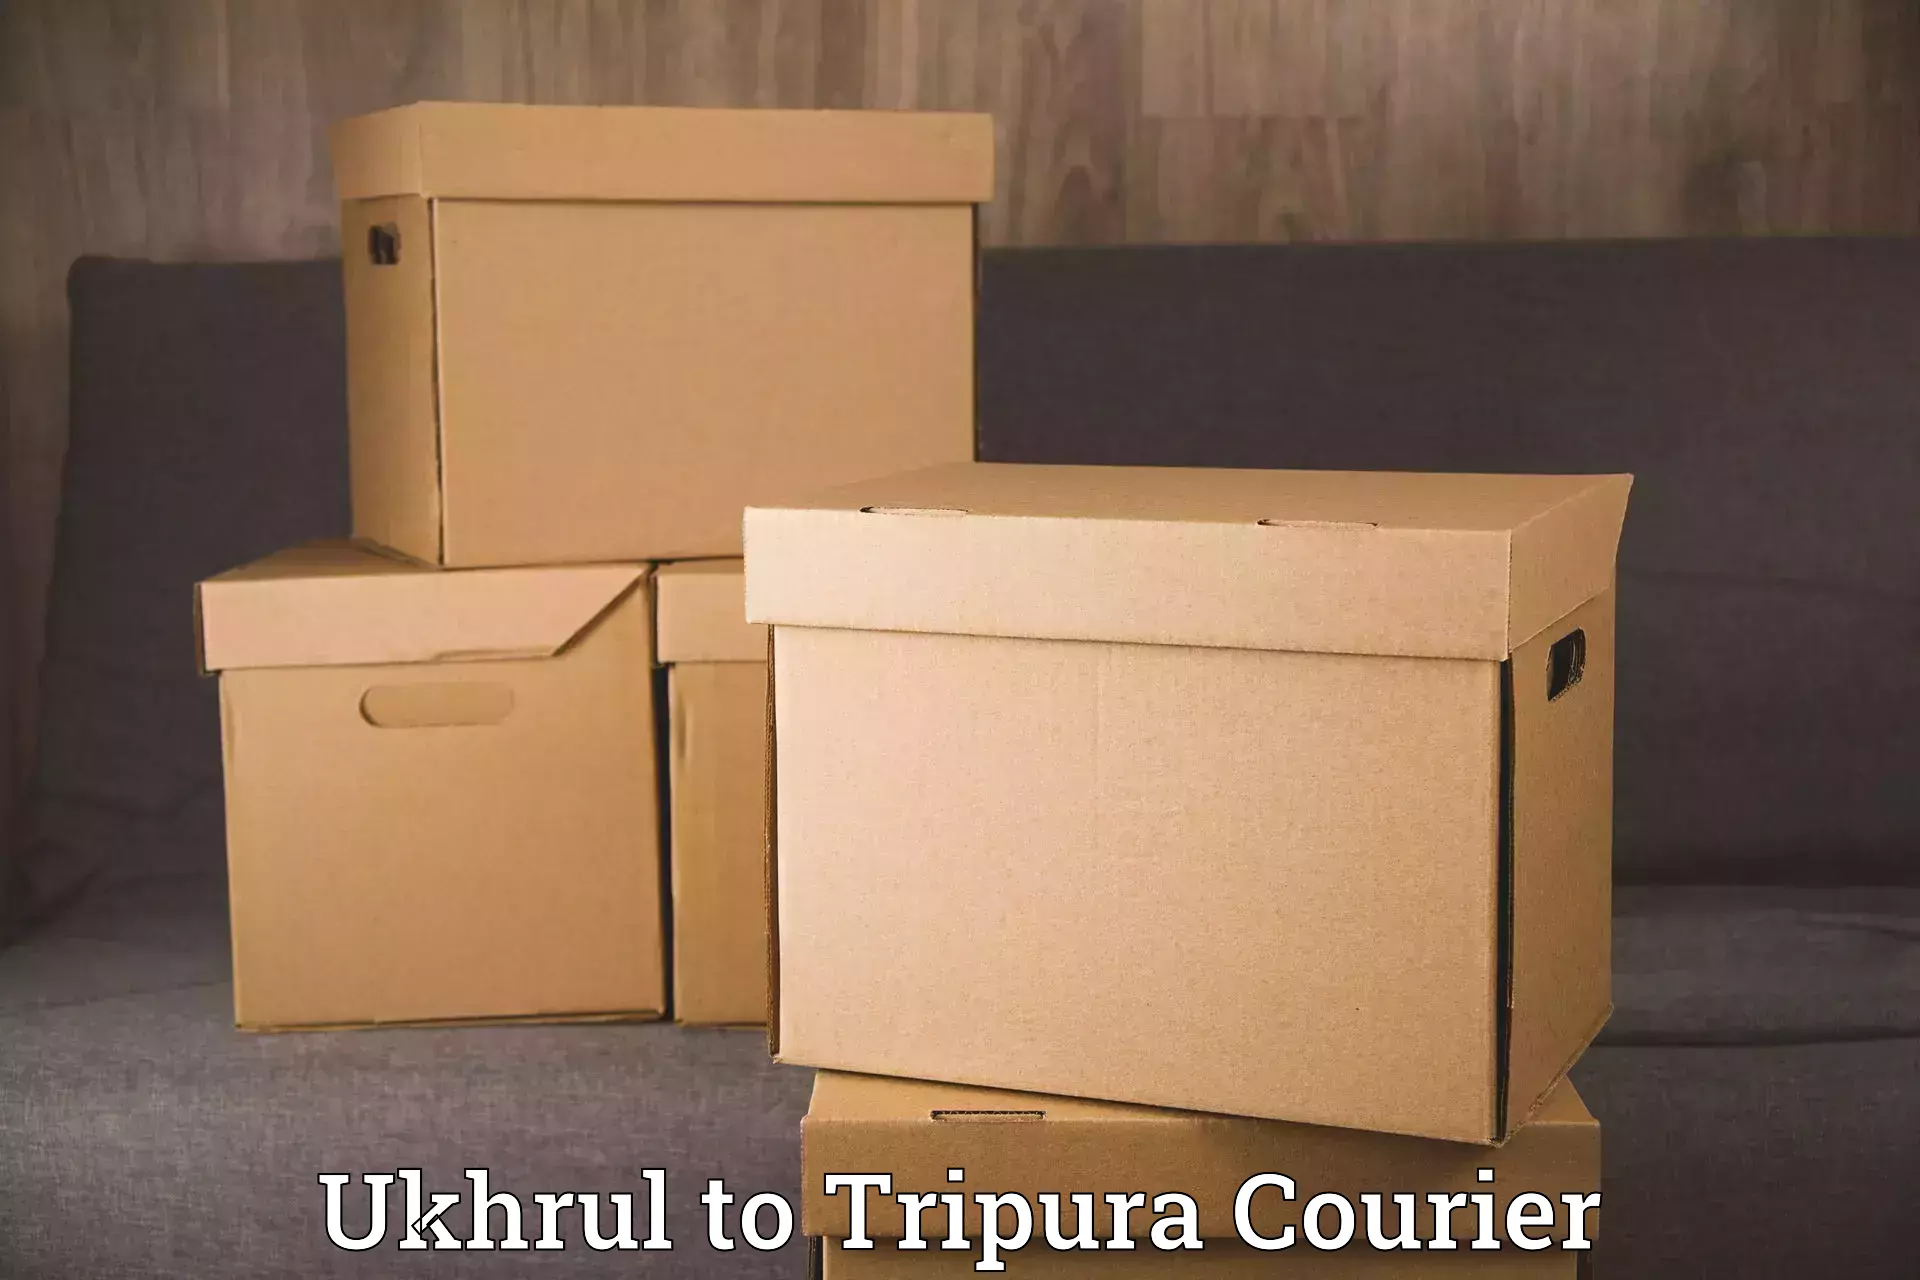 Reliable relocation services Ukhrul to Agartala